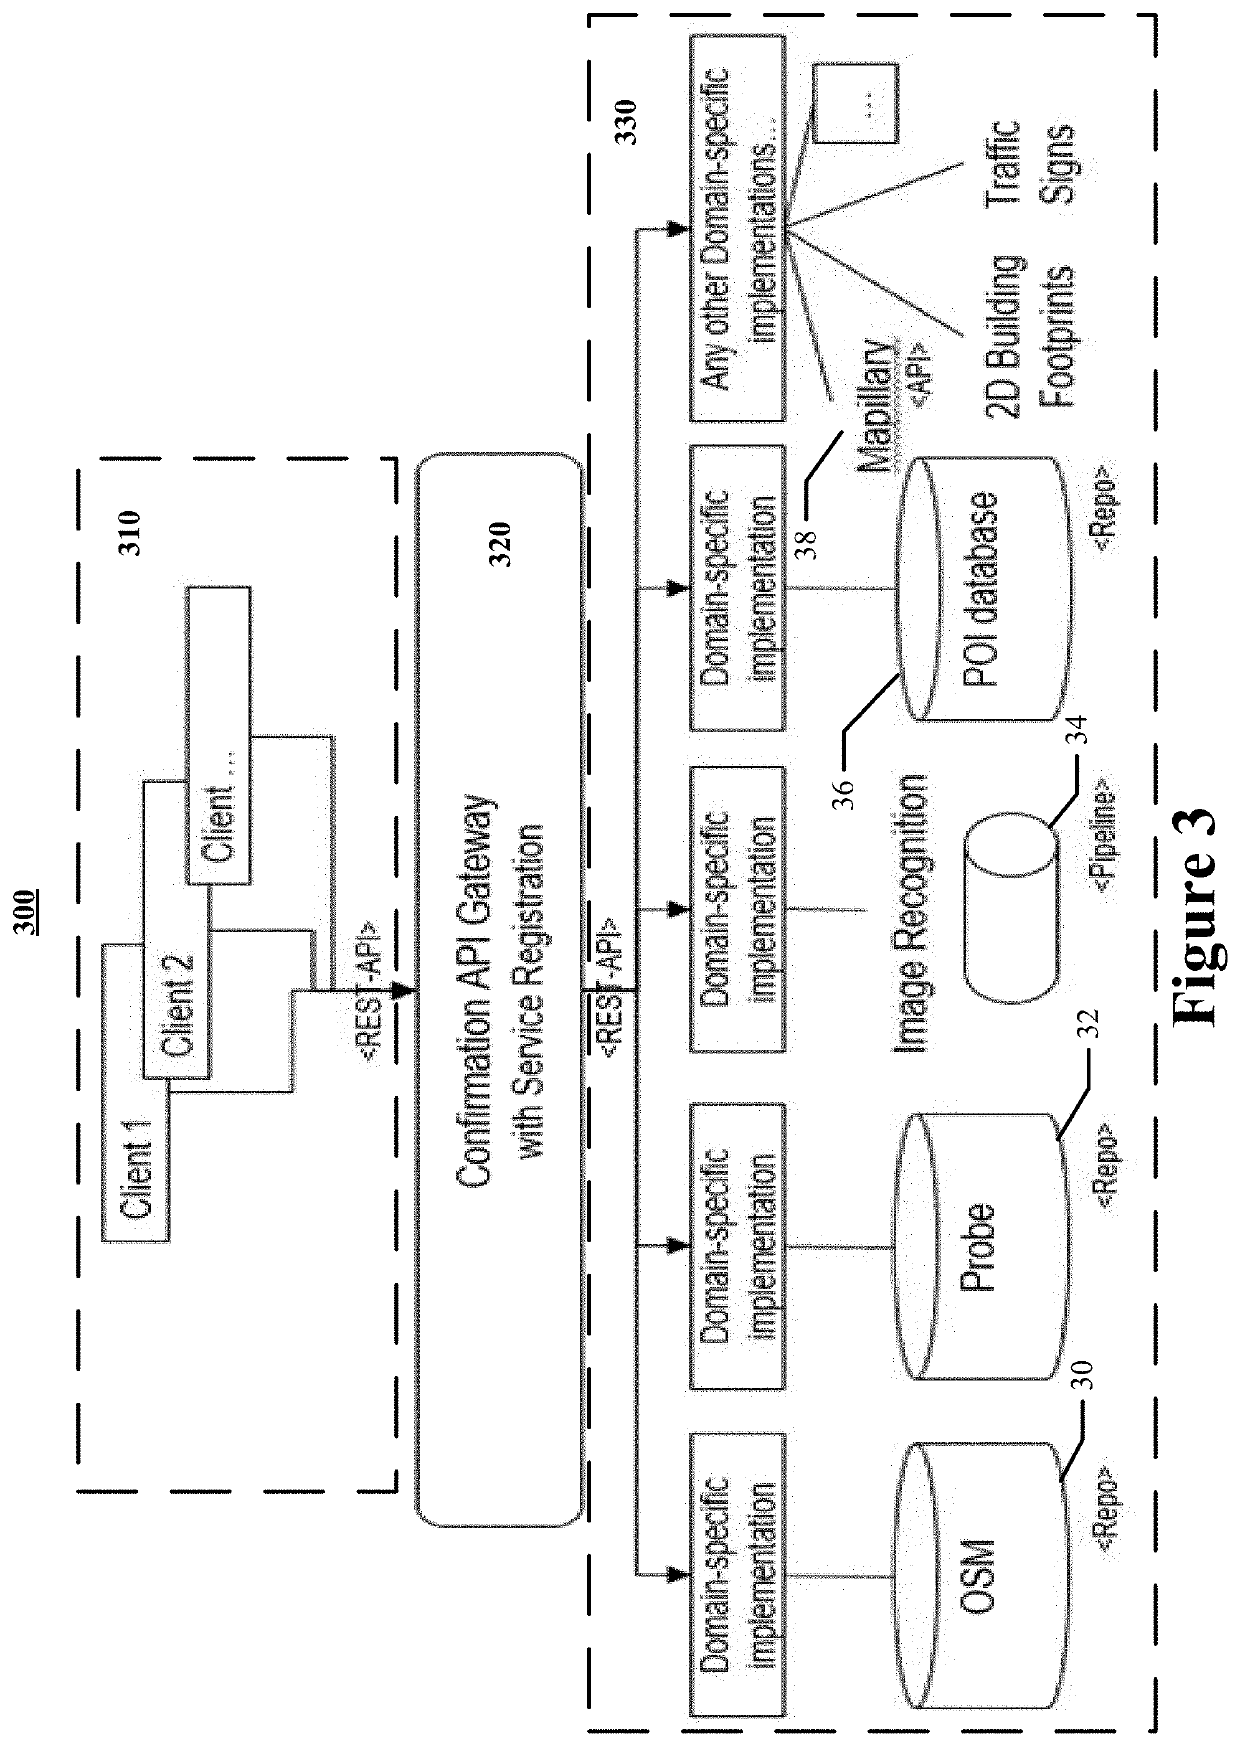 Methods and apparatus for cross-checking the reliability of data